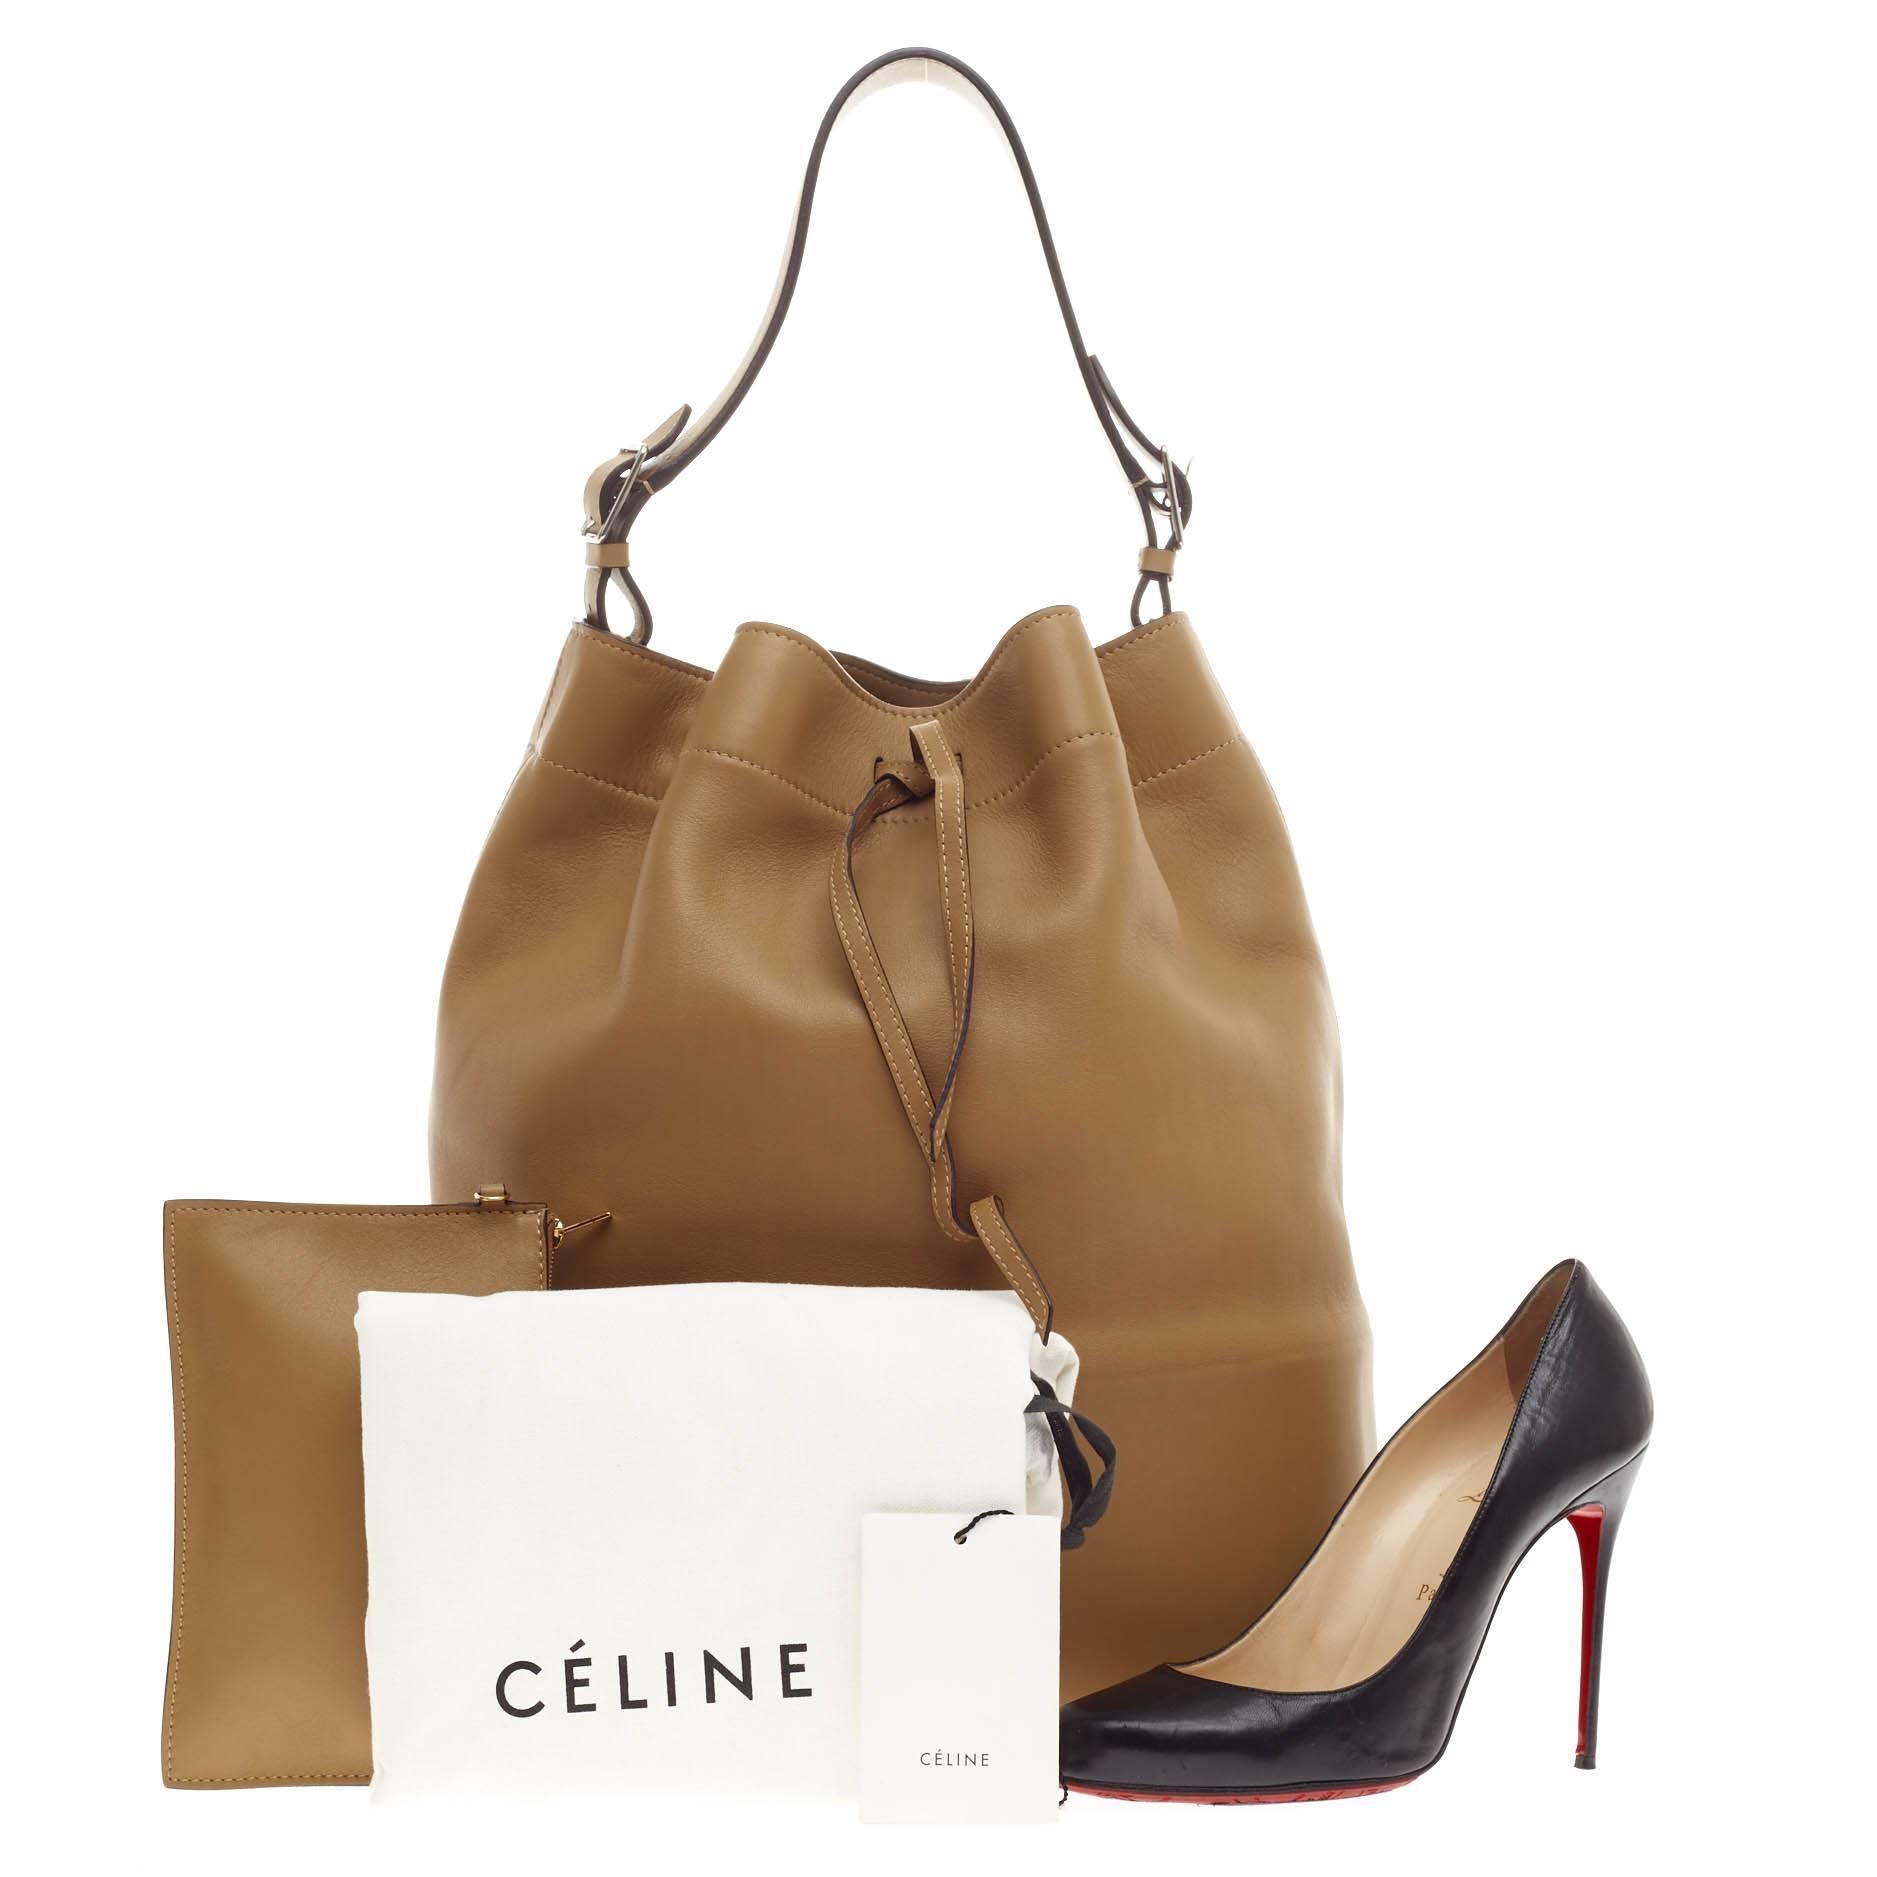 This authentic Celine Seau Drawstring Bag Leather presented in the brand's Fall/Winter 2013 Collection is elegant and sophisticated in style perfect for everyday work. Crafted in supple, tan calfskin leather, this classic, minimalist bucket bag